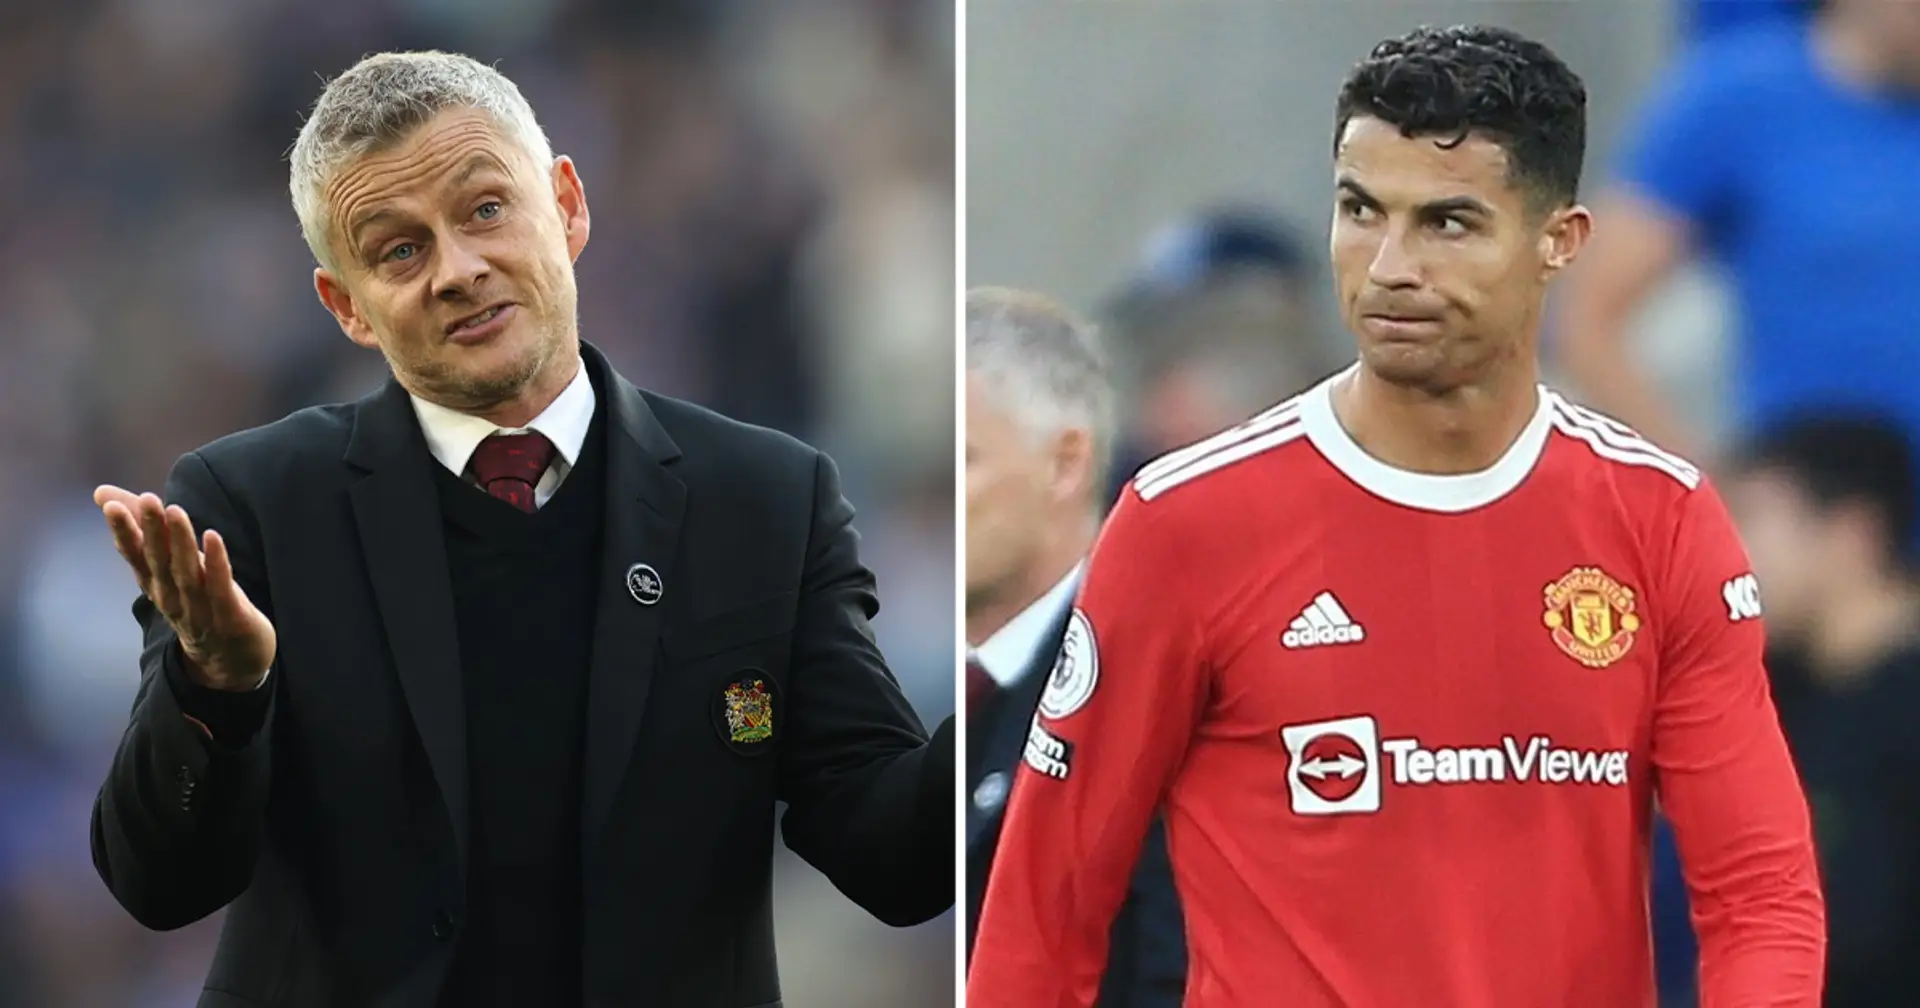 'He's gonna end Ole’s spell': fan explains why Ronaldo's arrival always meant trouble for Solskjaer